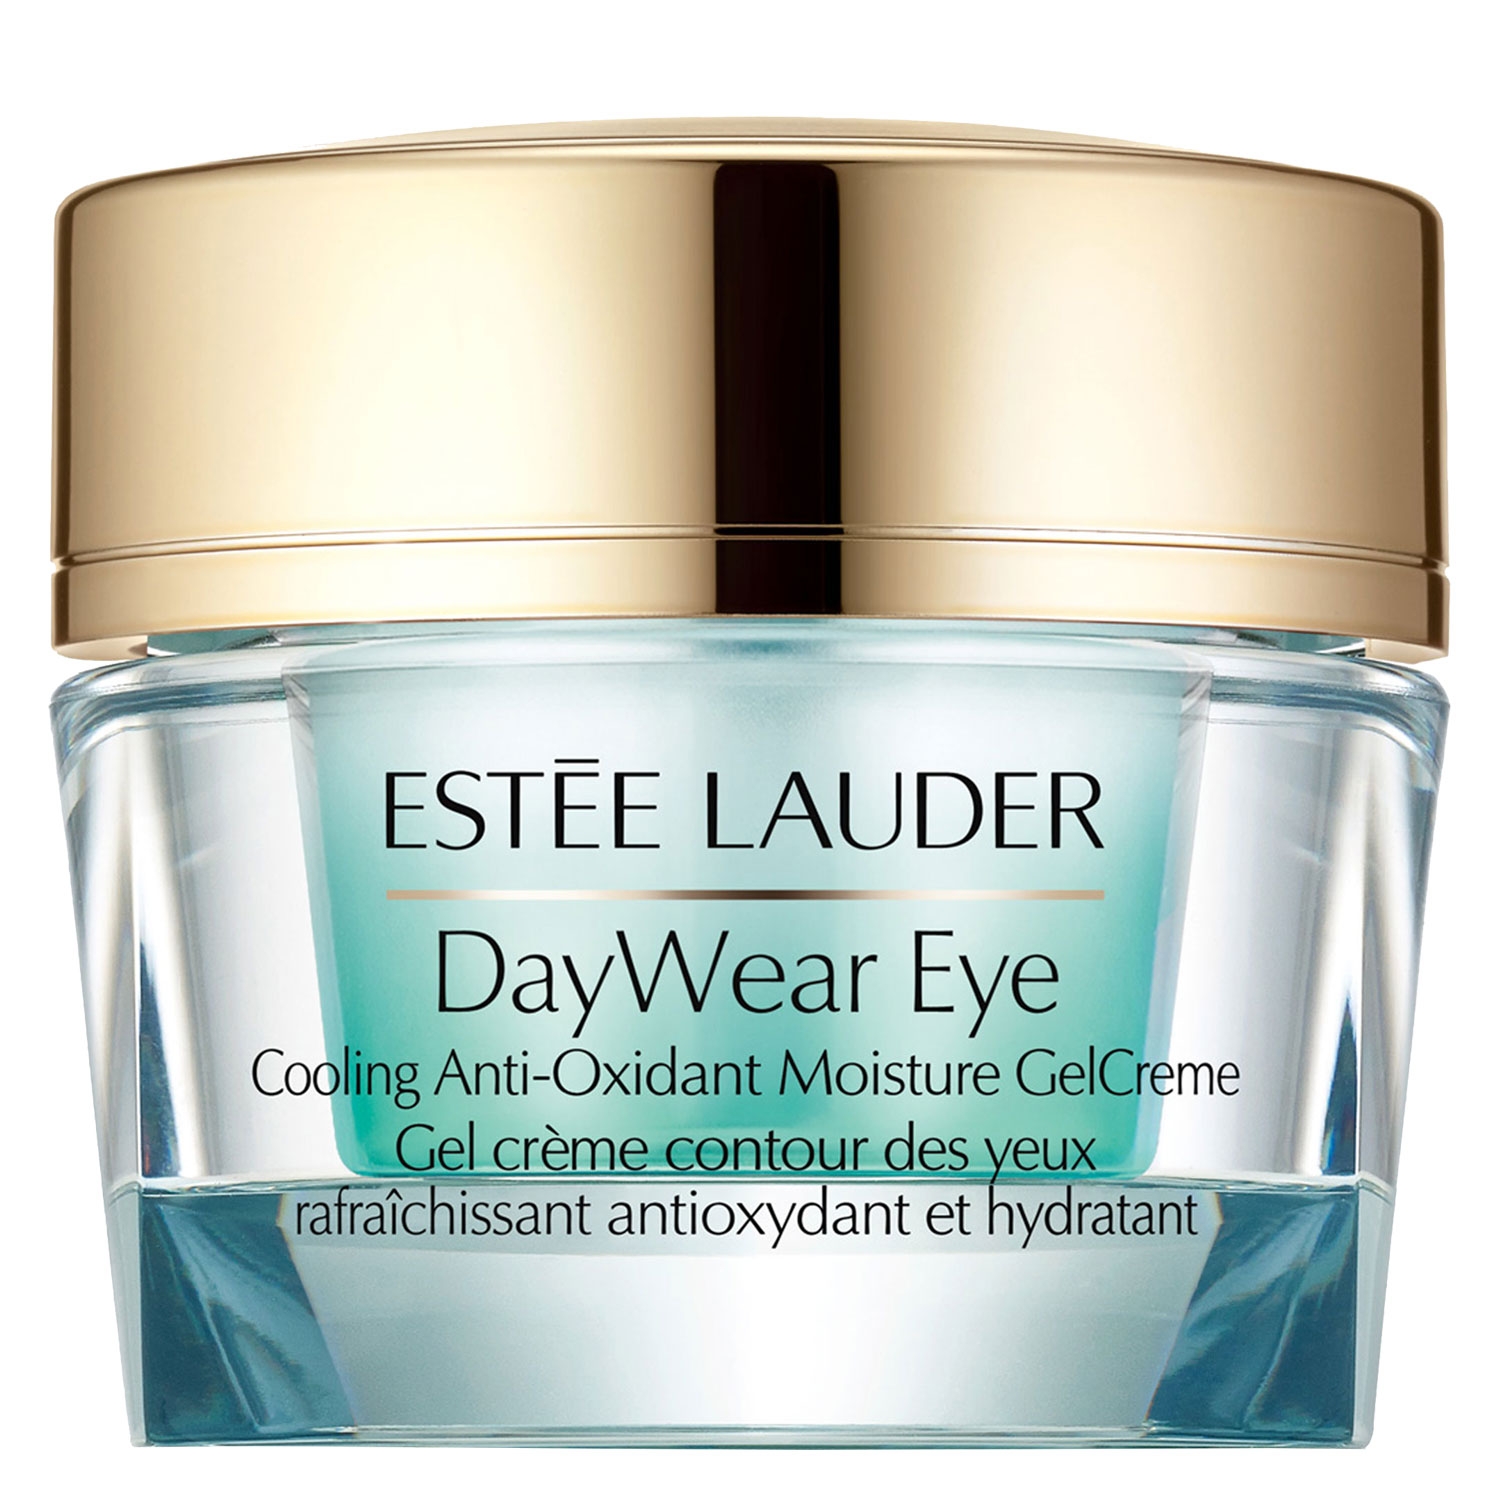 Product image from DayWear - Eye Cooling Moisture Gel Creme